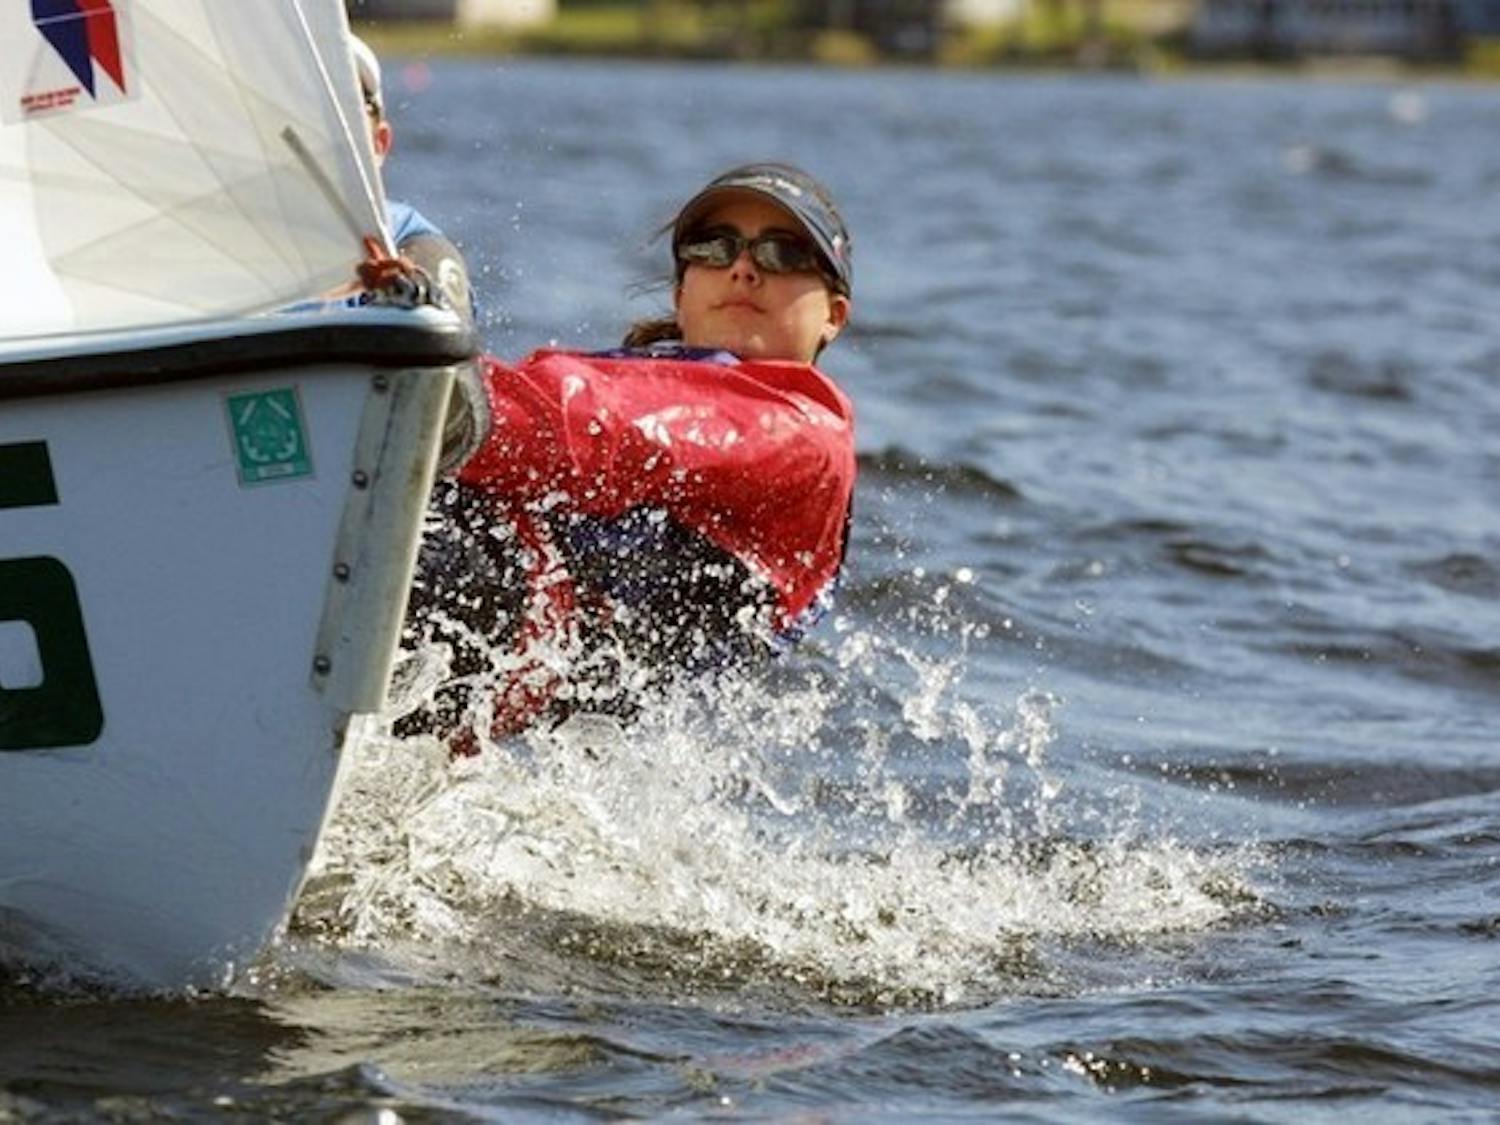 The coed sailing team put on an impressive show at the ACC championships, cruising to a wide margin of victory.